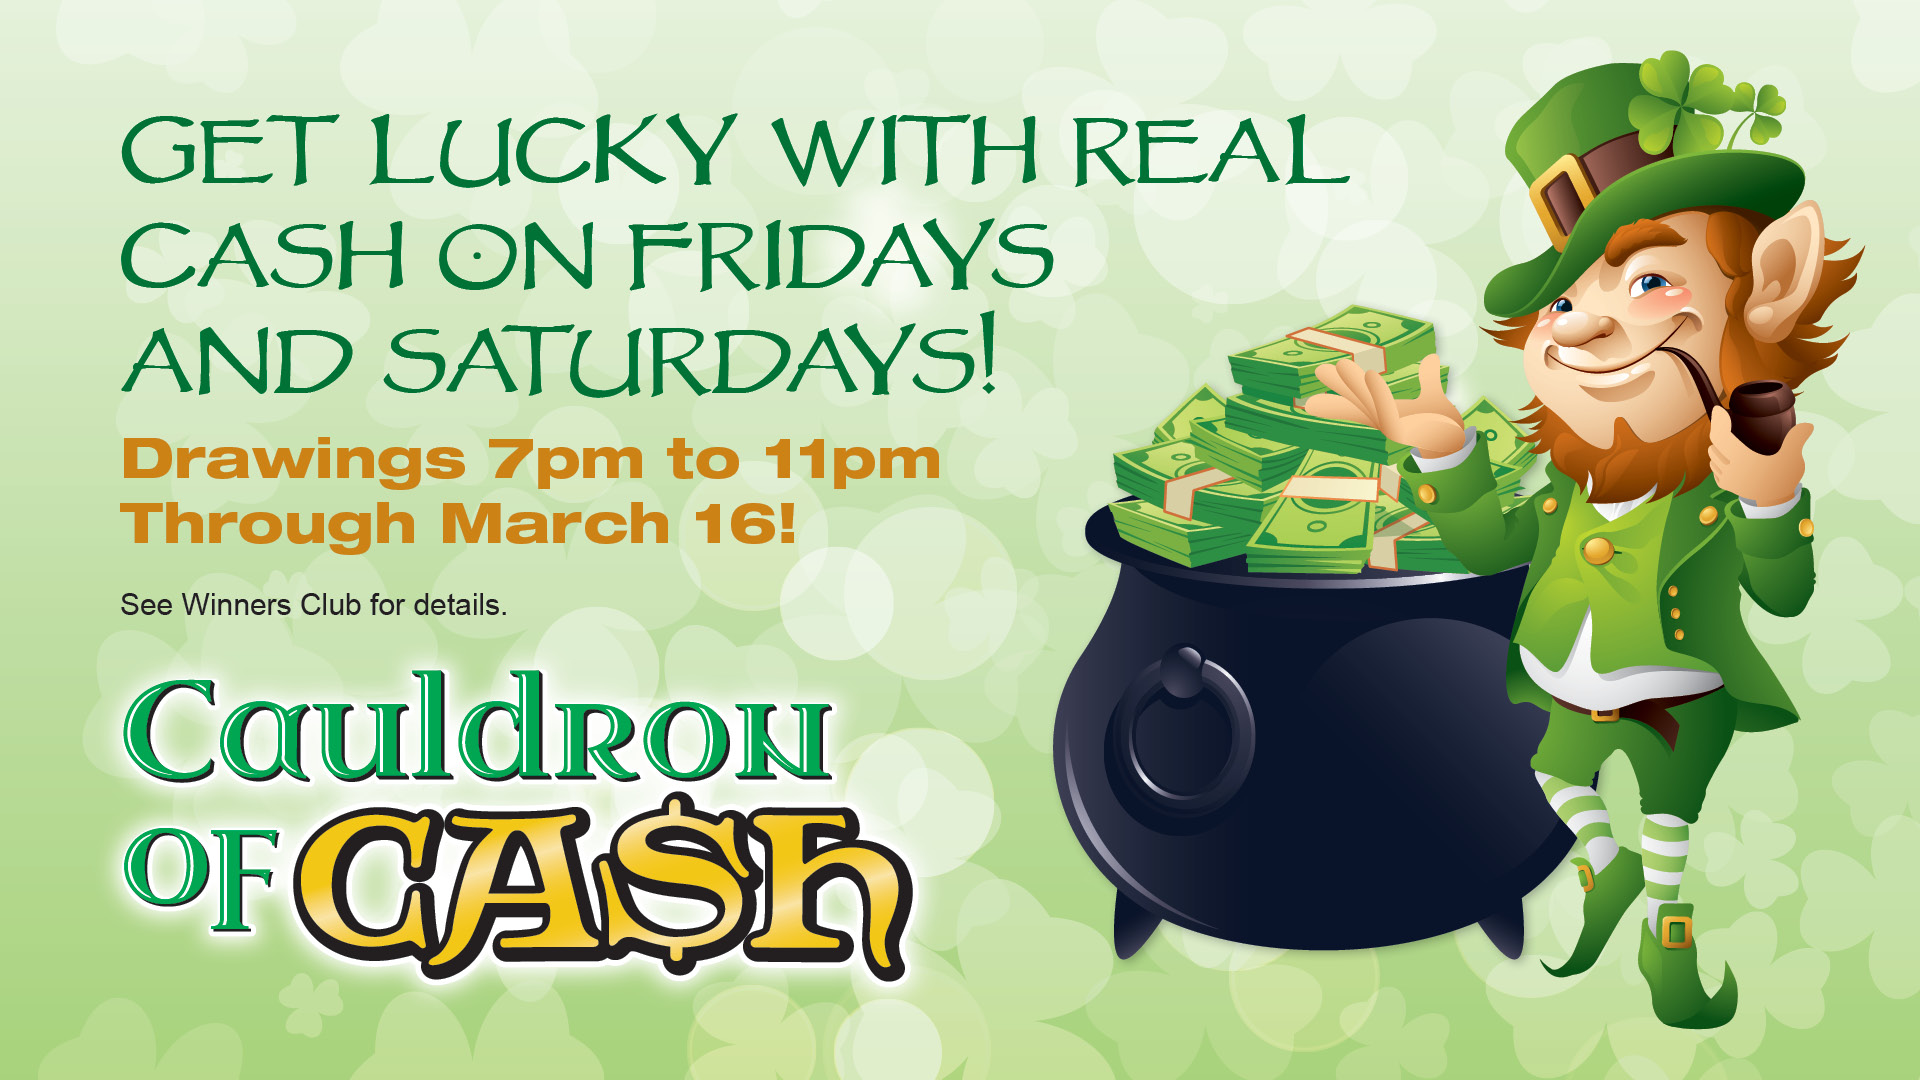 Cauldron of cash: Get lucky with real cash on Fridays and Saturdays! Drawings 7pm to 11pm through March 16! See Winners Club for details